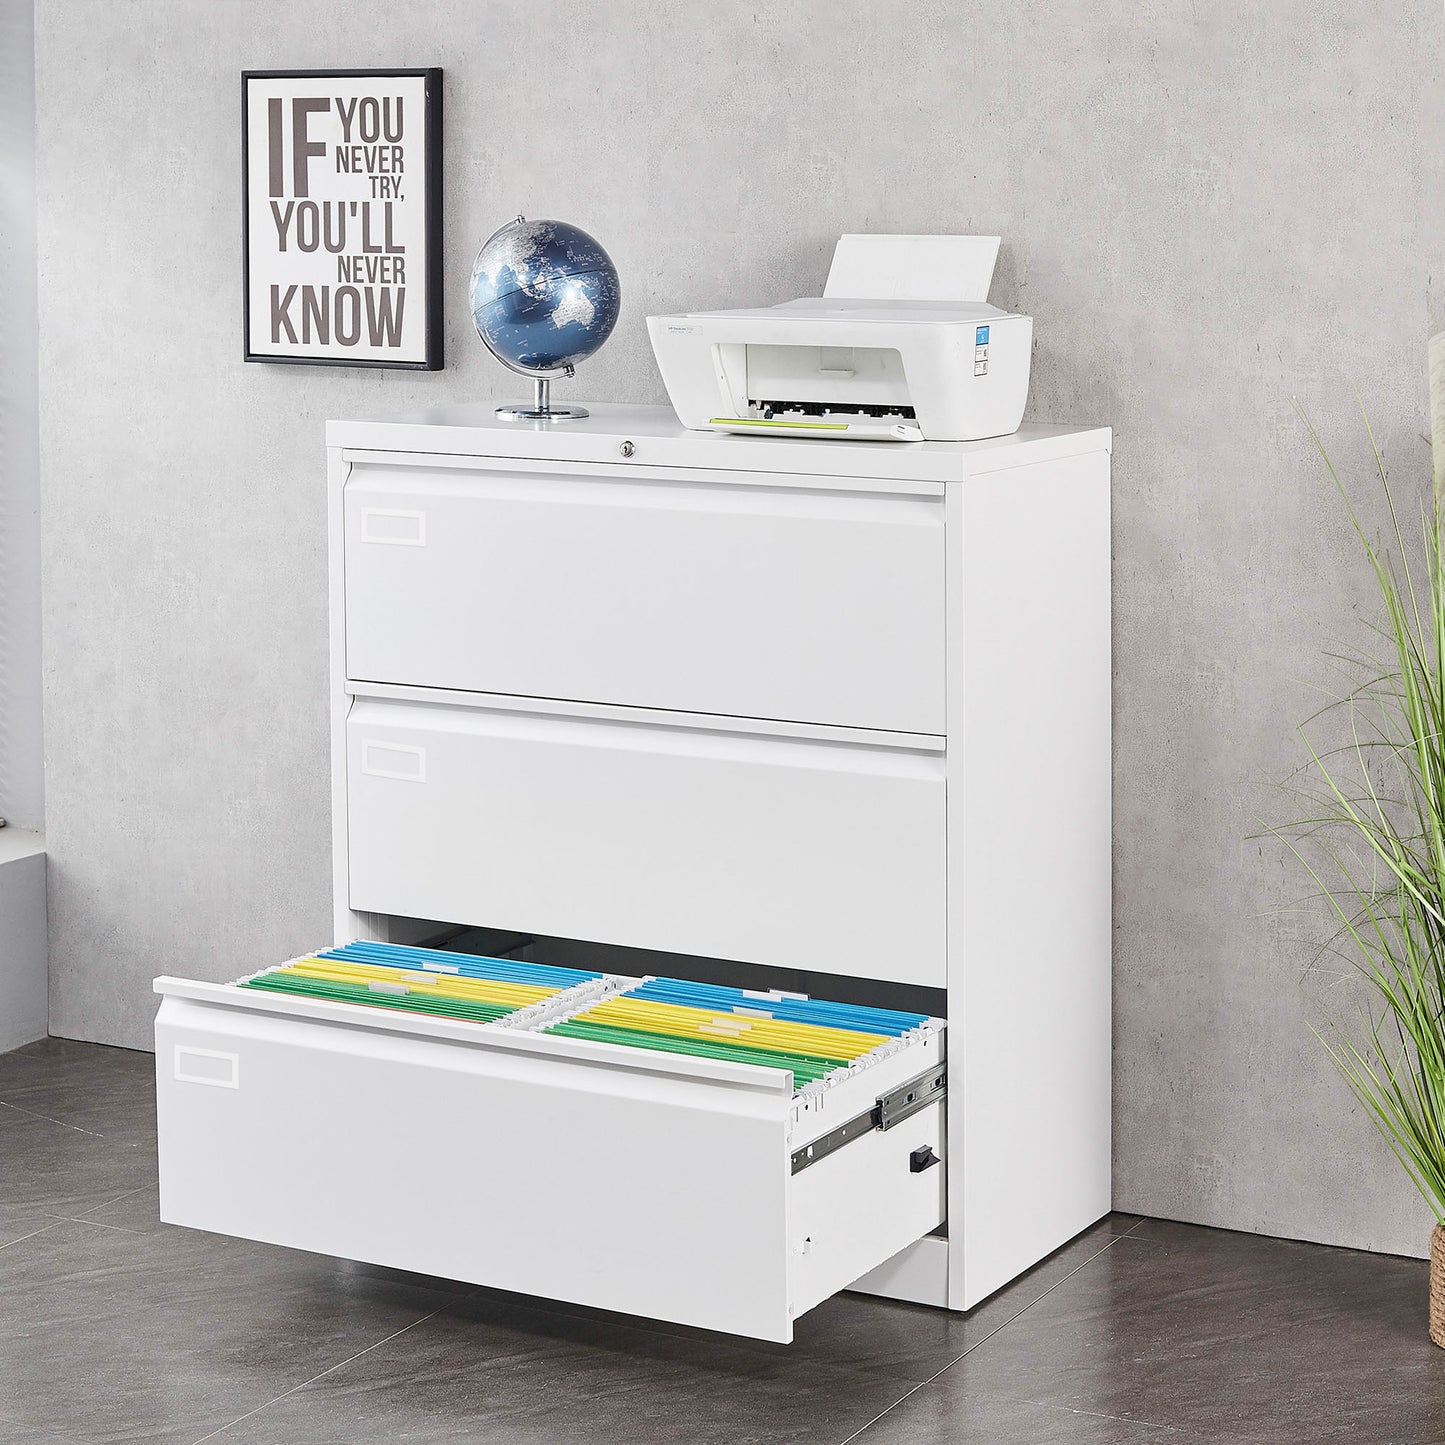 Large 3 Drawer Lateral Filing Cabinet with Lockable Drawers for Home Office